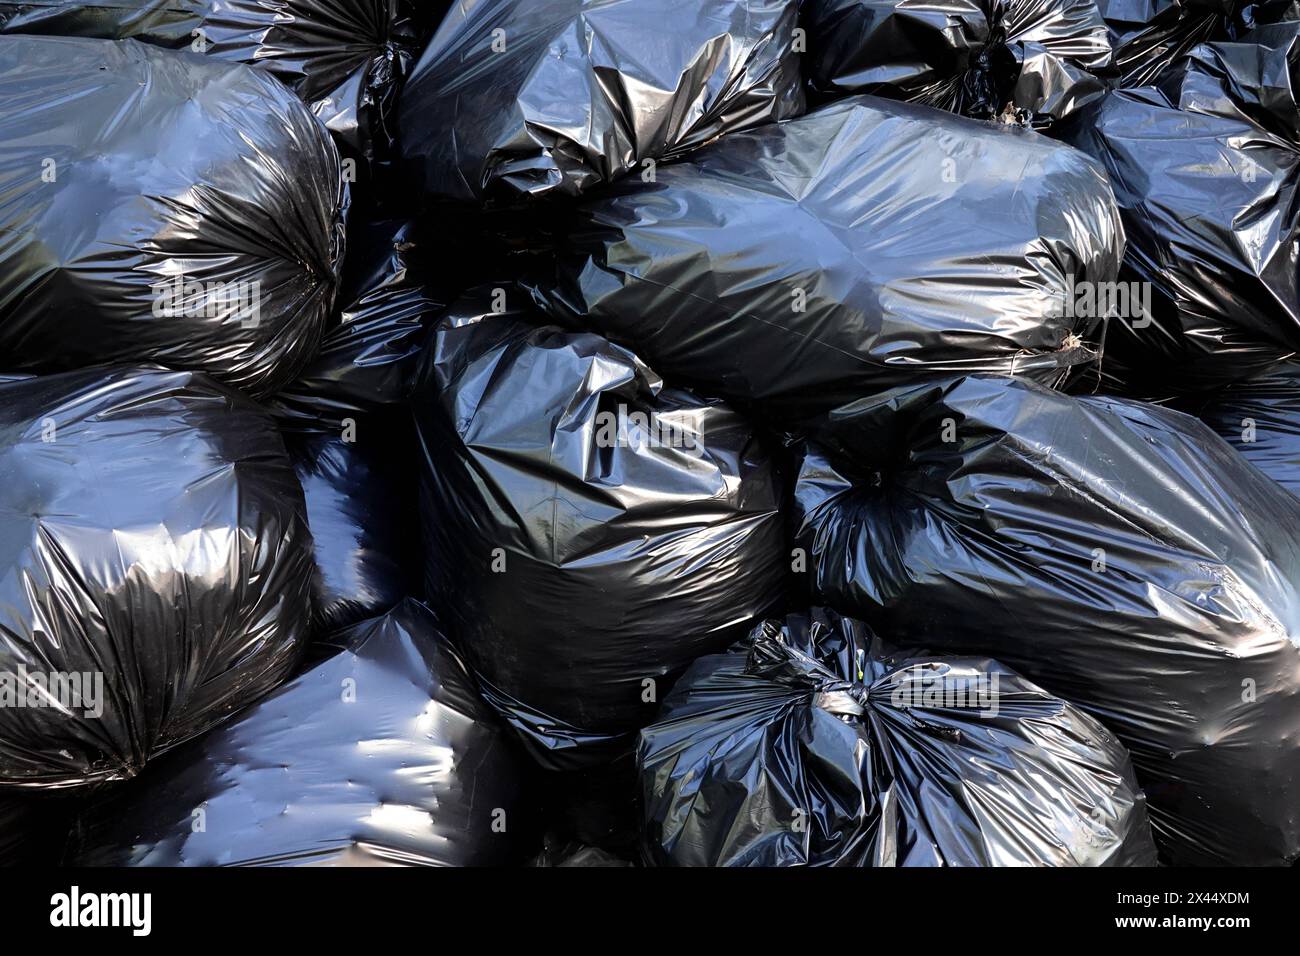 Lot black filled garbage bags as background close-up Stock Photo